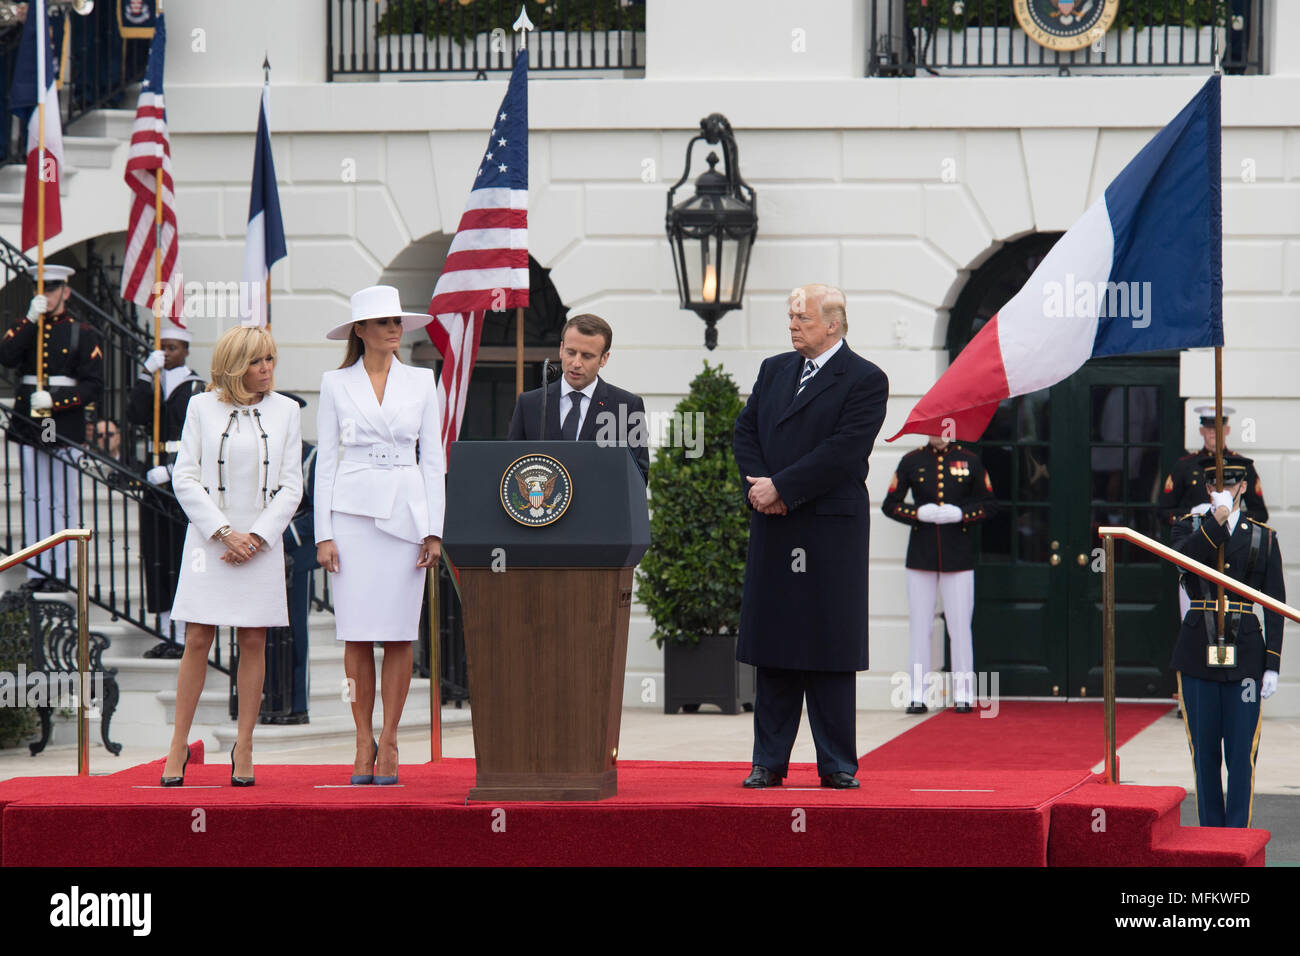 French President Emmanuel Macron speaks during a ceremony welcoming him to the White House, in Washington, D.C., April 24, 2018. (U.S Army photo by Zane Ecklund) Stock Photo